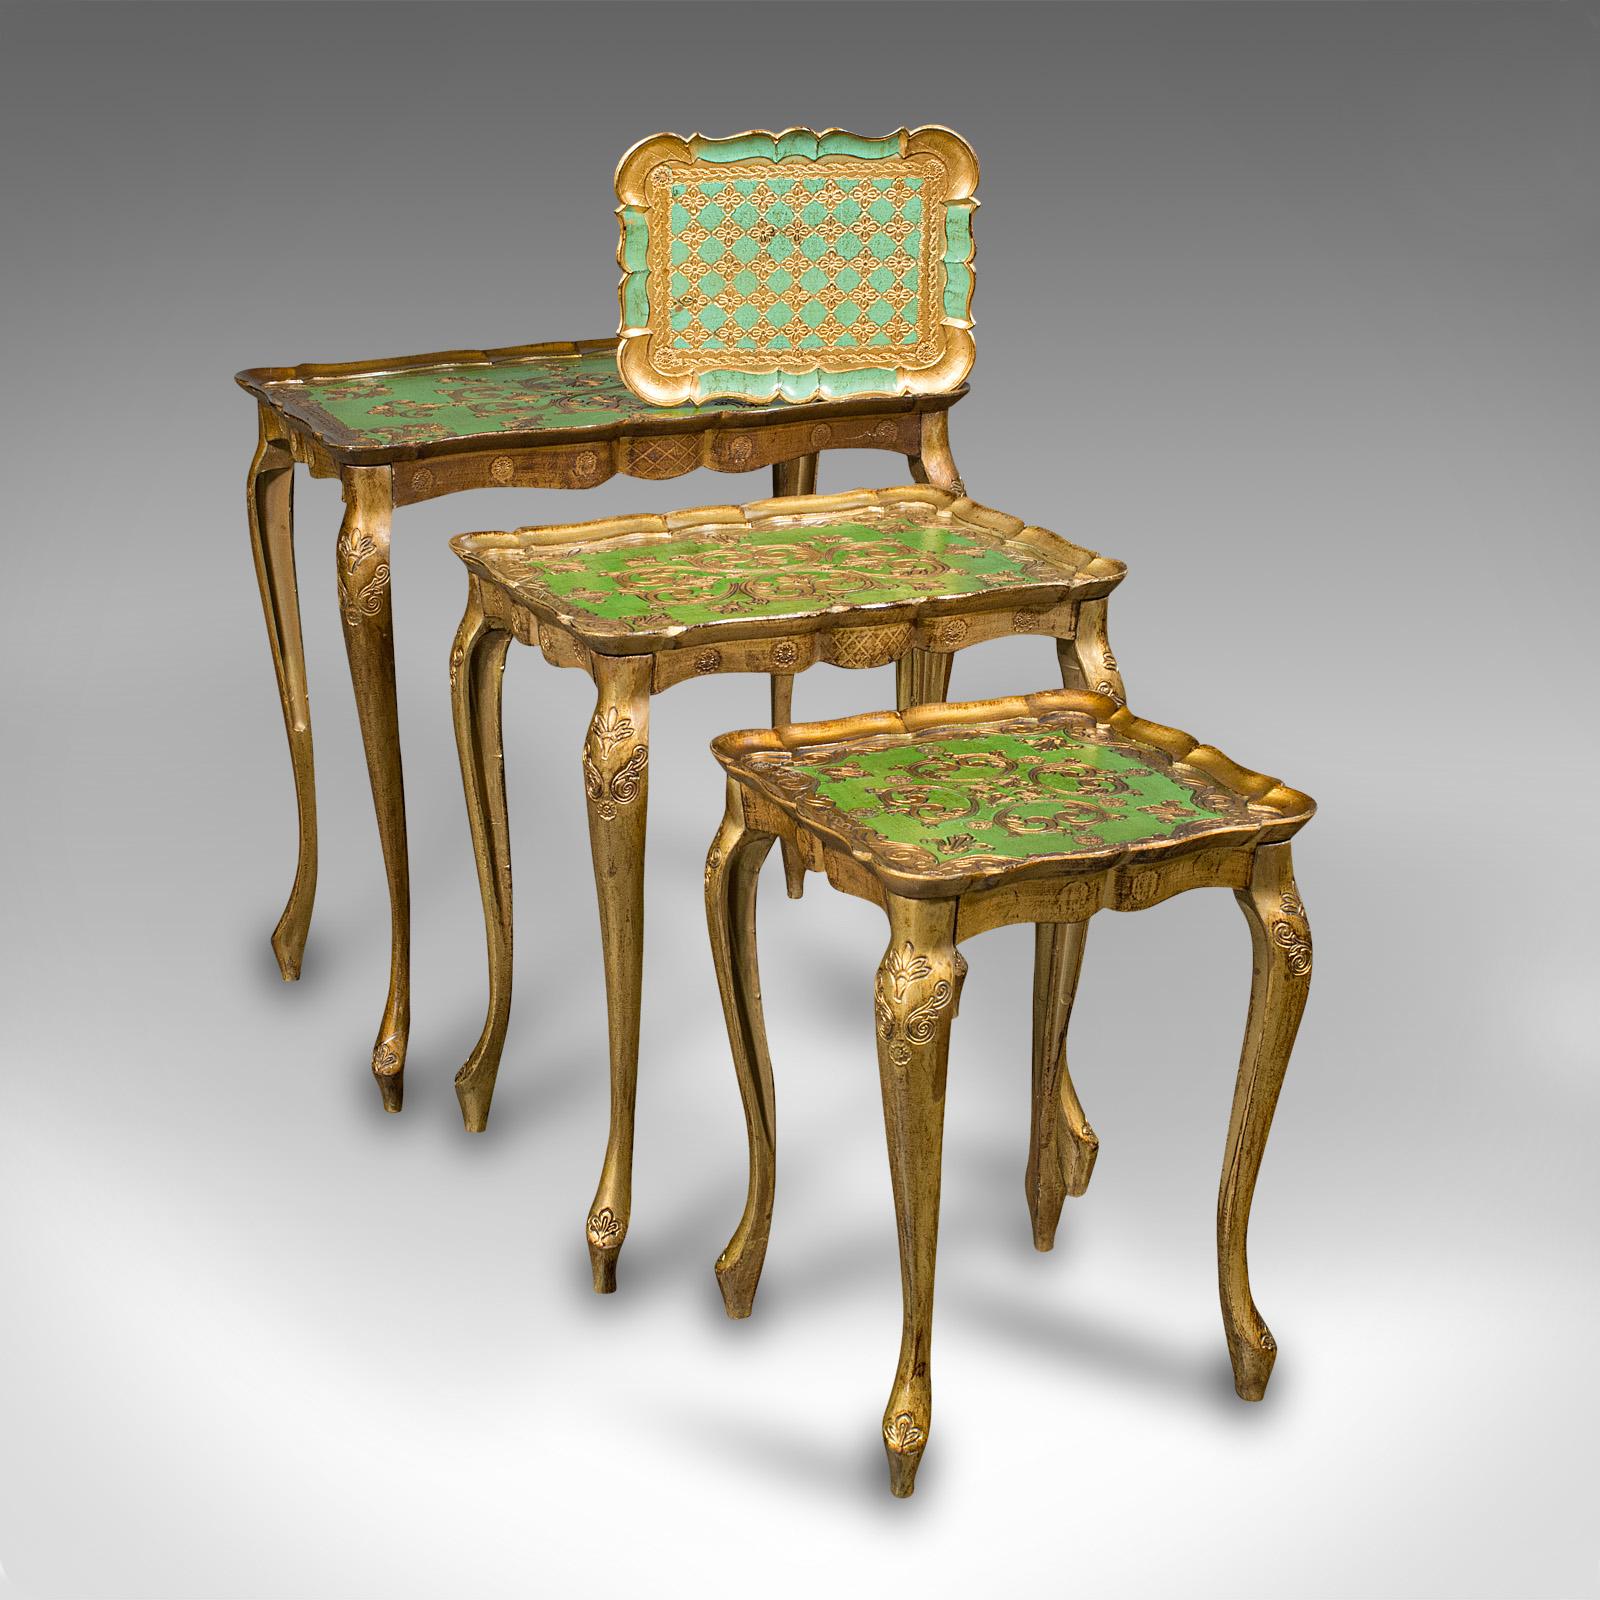 This is a trio of vintage nesting tables. An Italian, gilt composite side table, dating to the late 20th century, circa 1970.

Enthusiastic Rococo revival taste to this distinctive nest of tables
Displaying a desirable aged patina